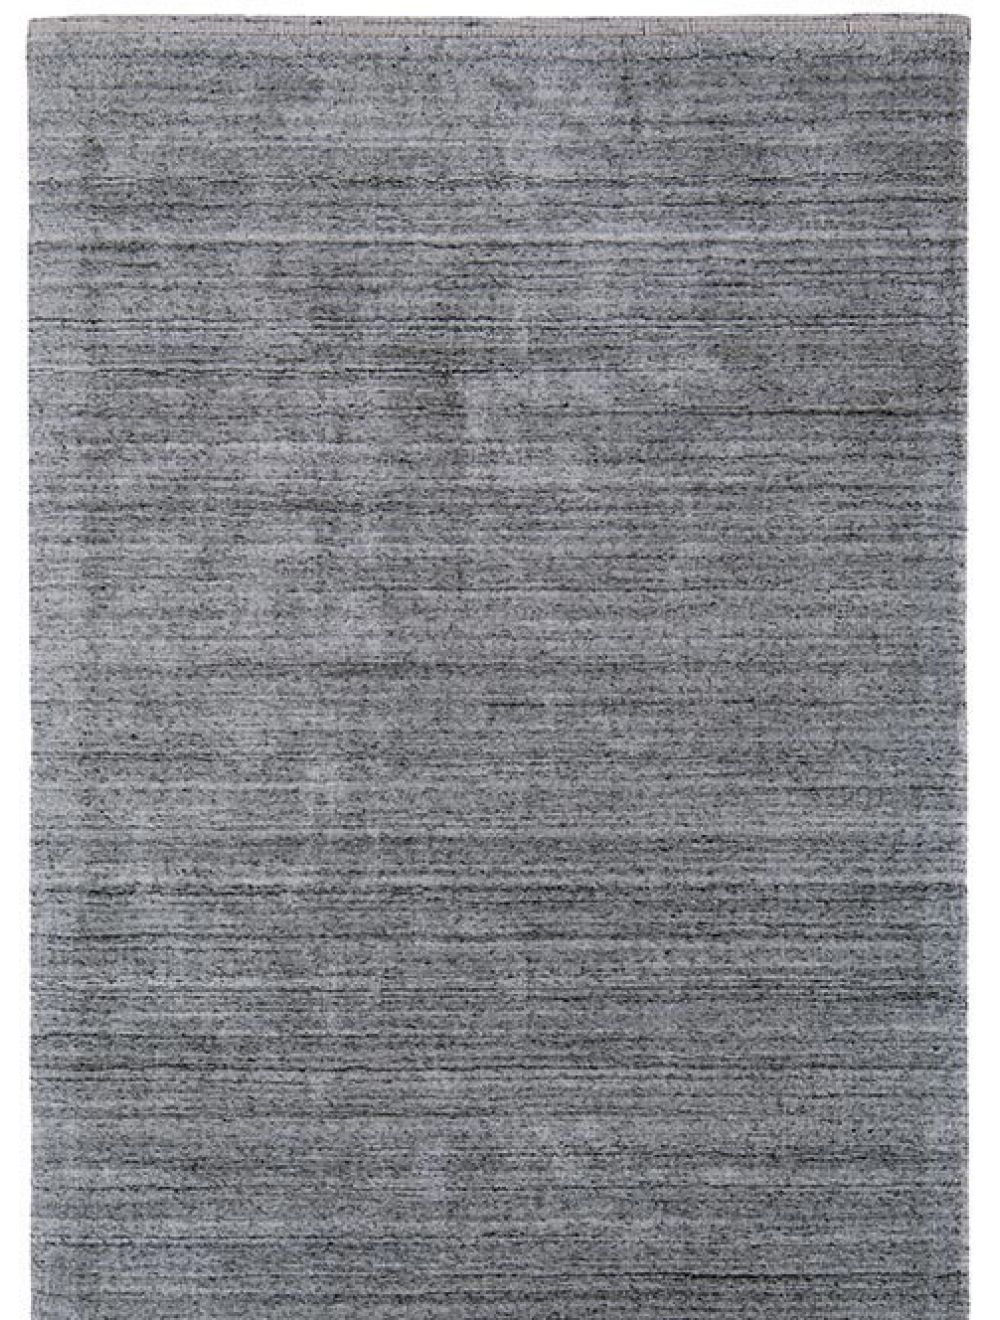 Asiatic Linley Charcoal Rugs  Modern Rugs For Sale Uk Intended For Charcoal Rugs (View 14 of 15)